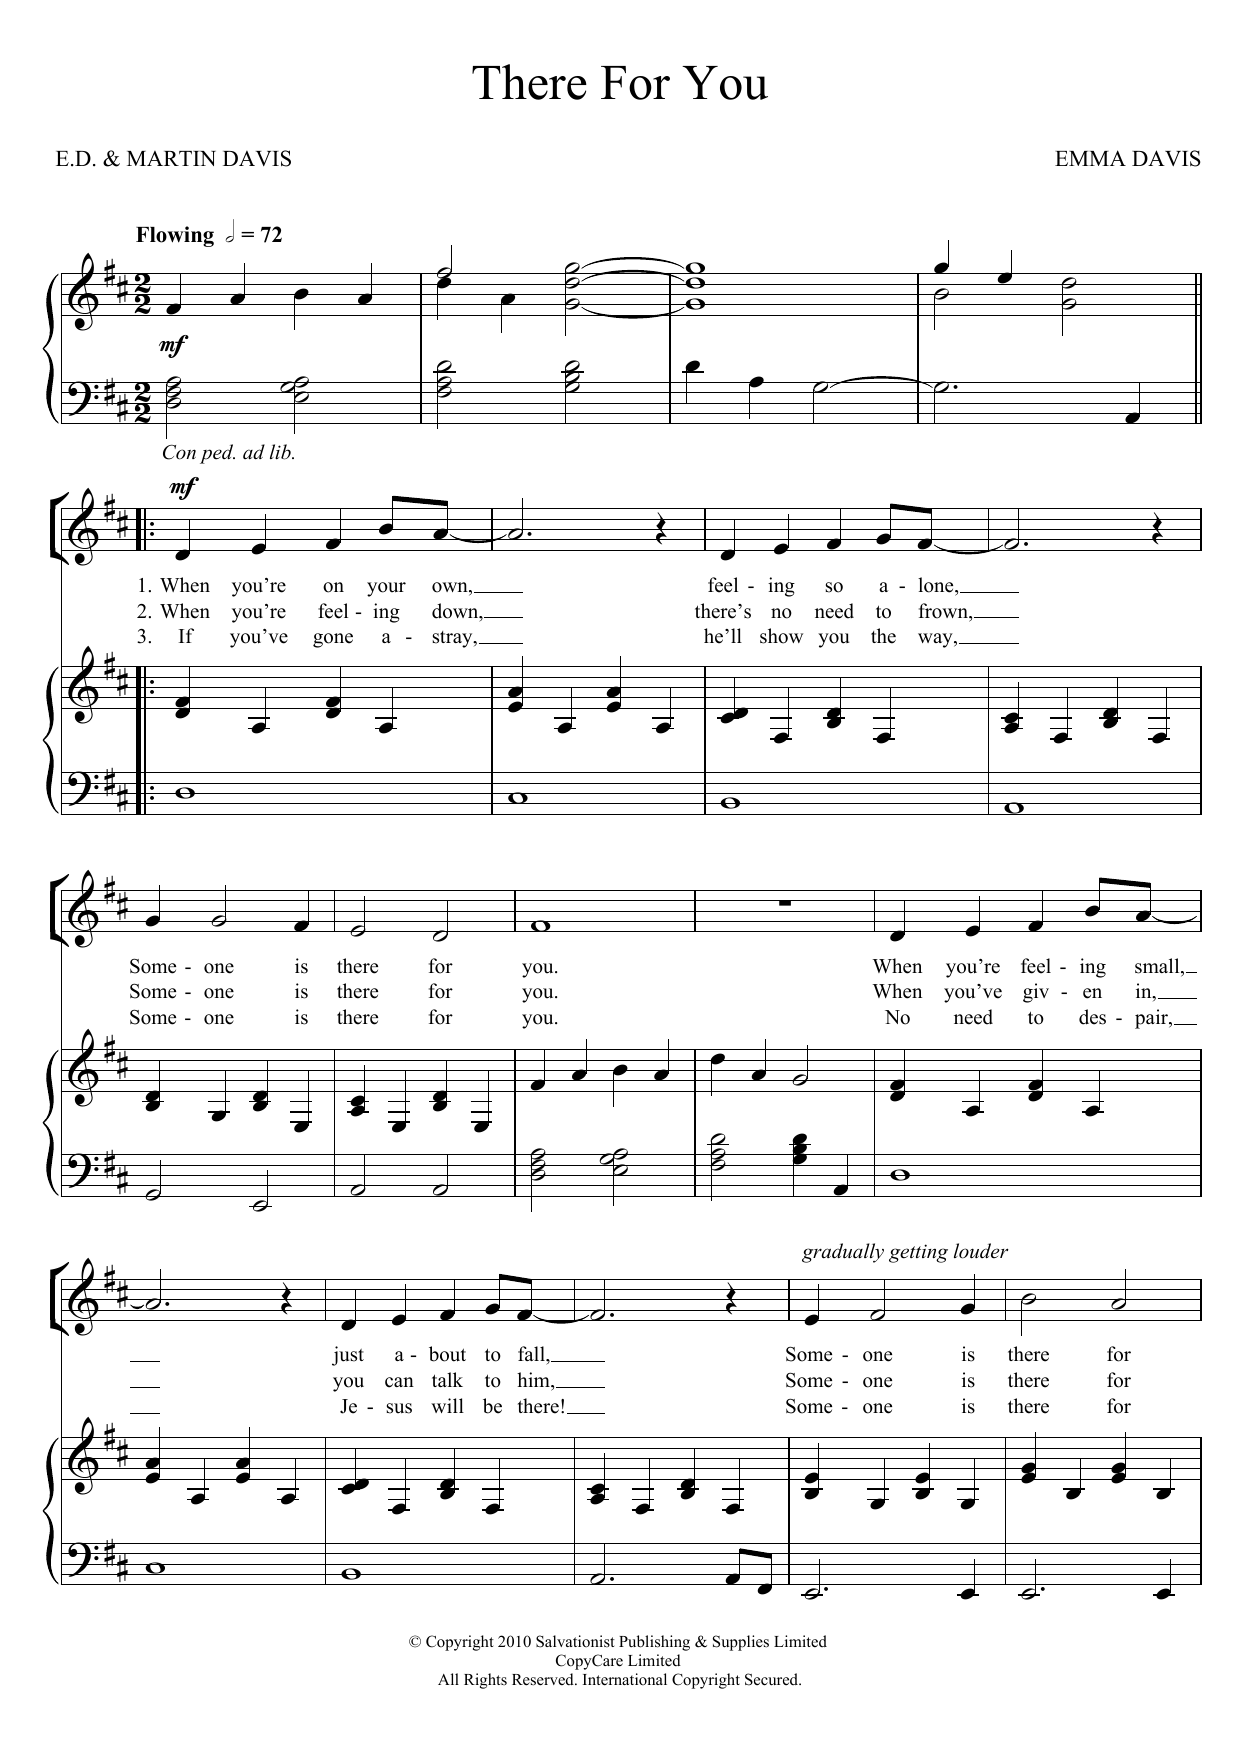 Download The Salvation Army There For You Sheet Music